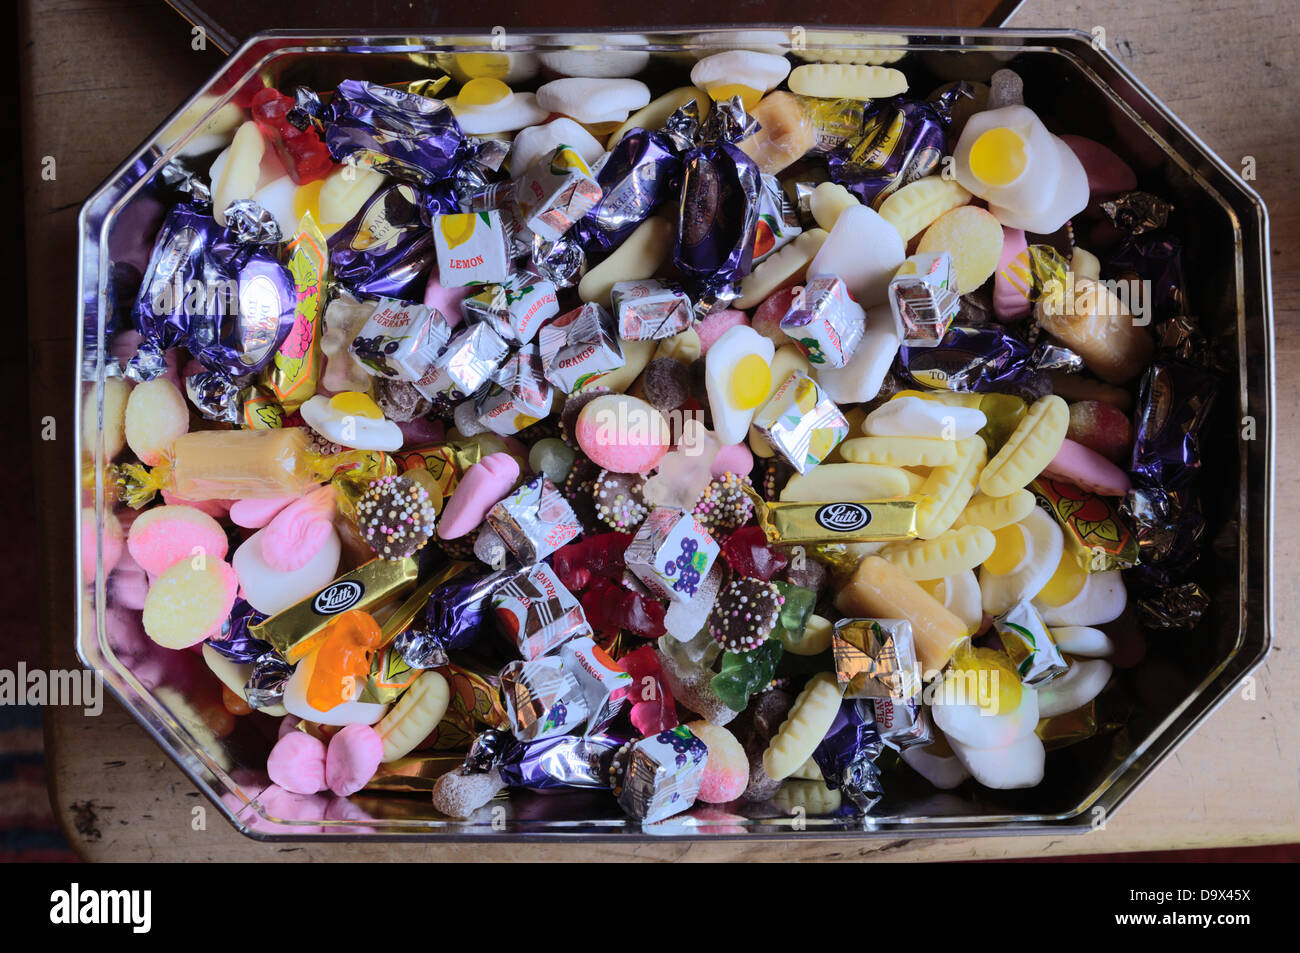 A tin full of pick and mix sweets, Wales, UK. Stock Photo